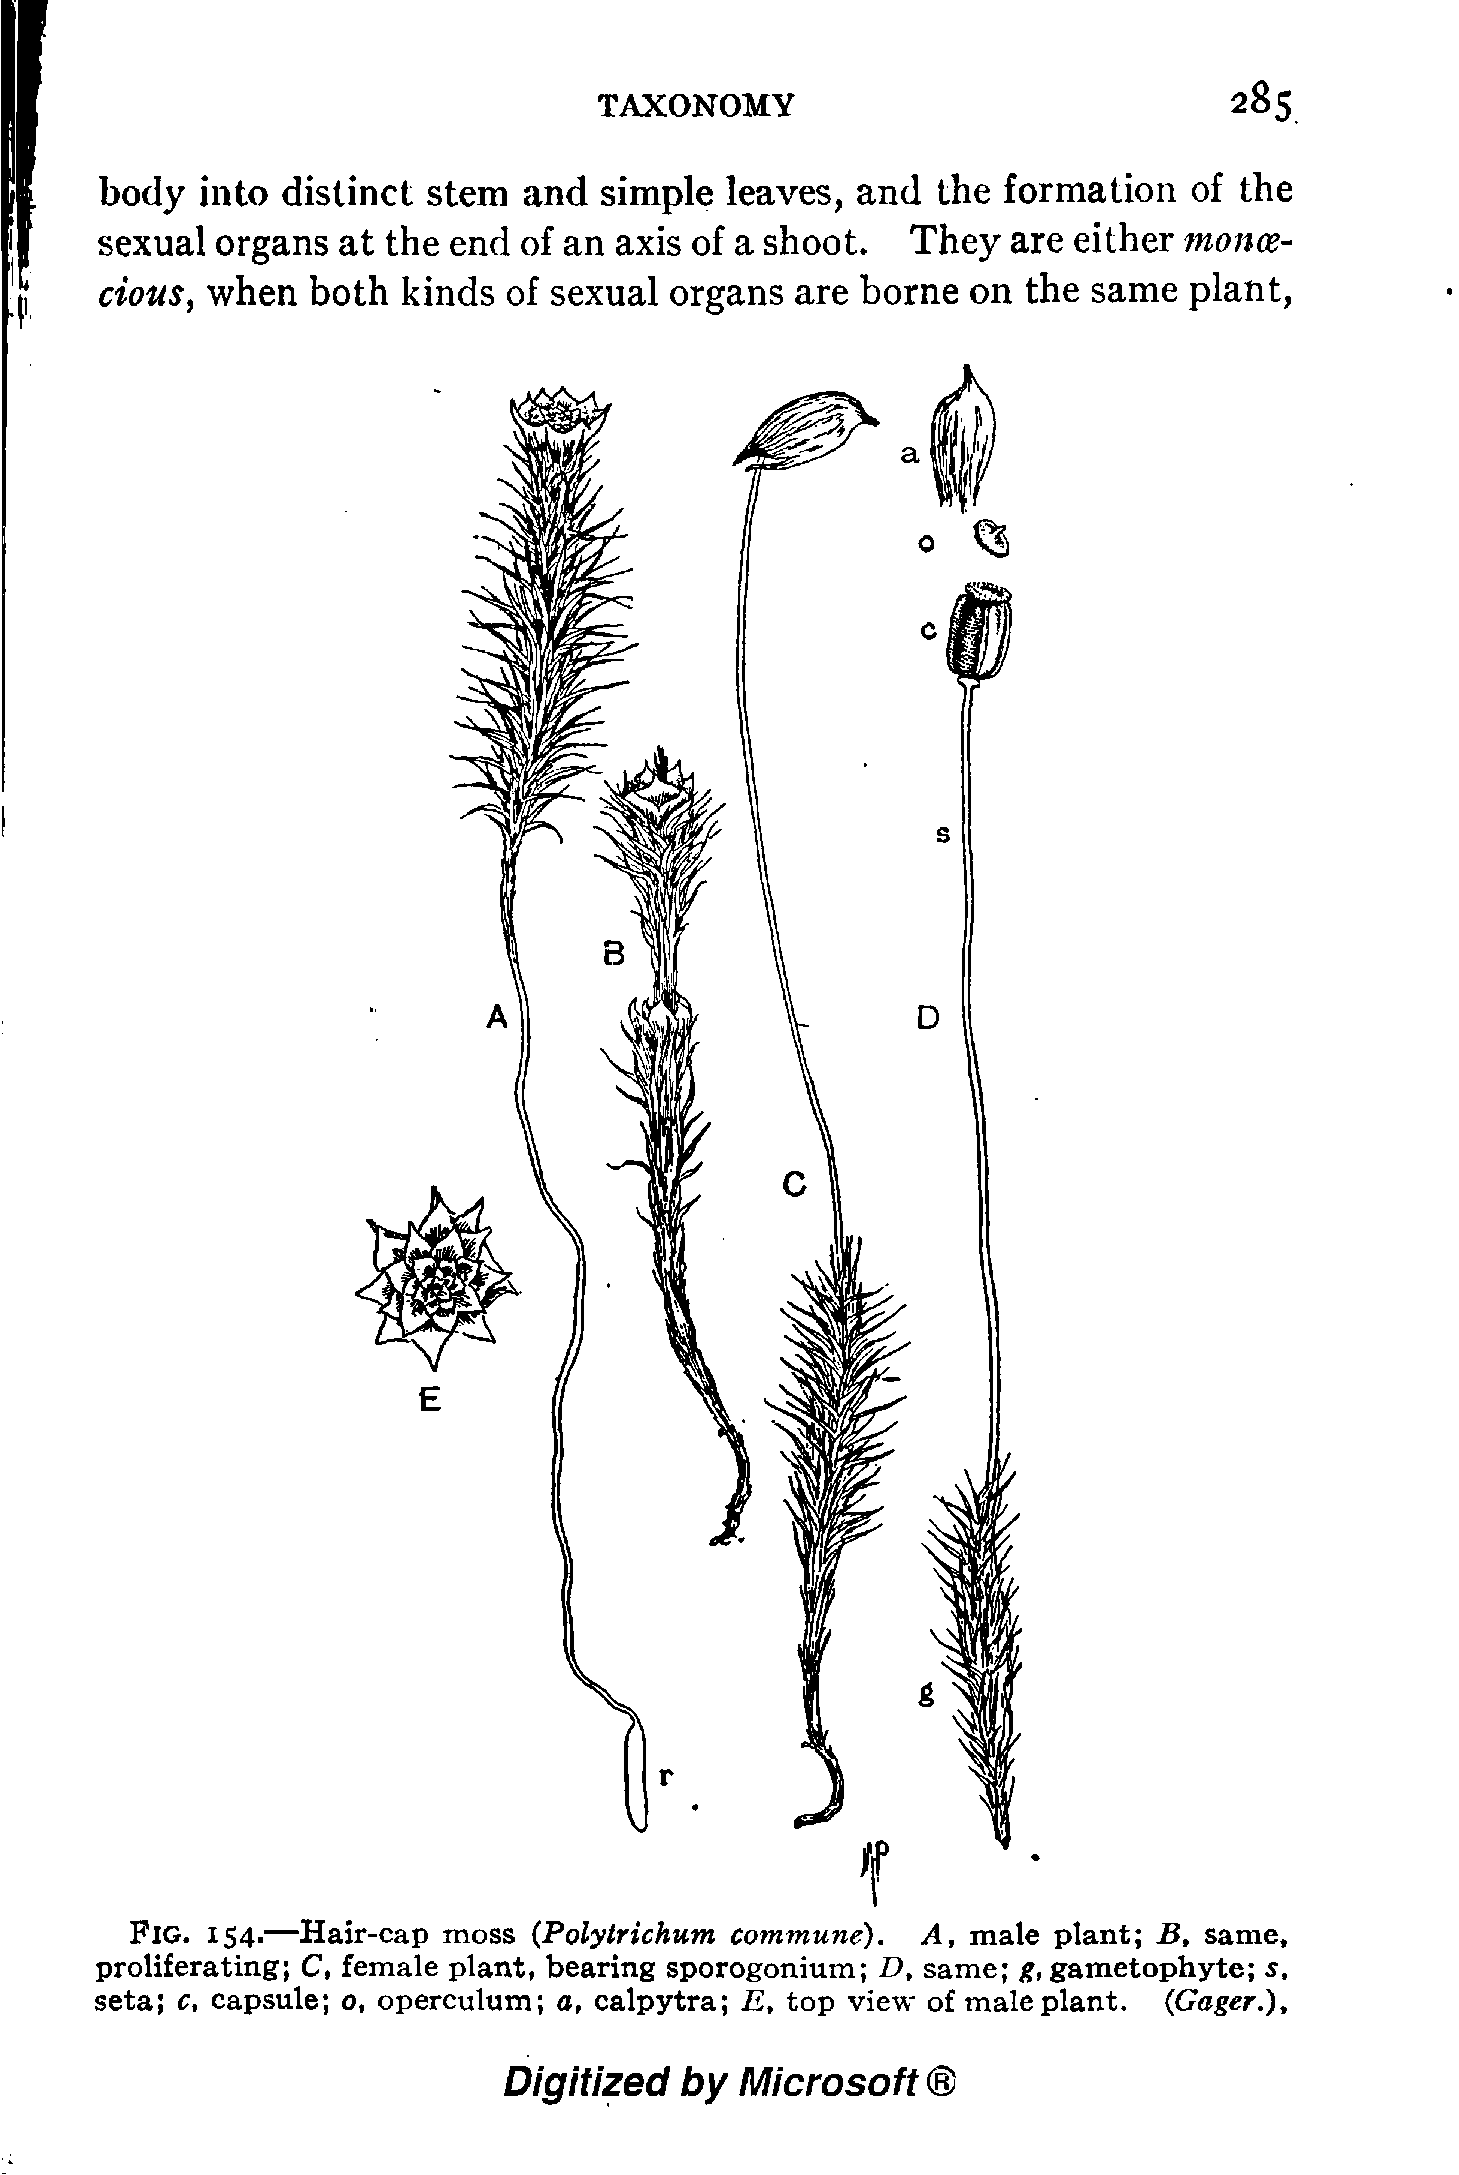 Fig. 154.—Hair-cap moss (Polylrichum commune). A, male plant B, same, proliferating C, female plant, bearing sporogonium D, same g, gametophyte s, seta c, capsule 0, operculum a, calpytra E, top view of male plant. (Gager.),...